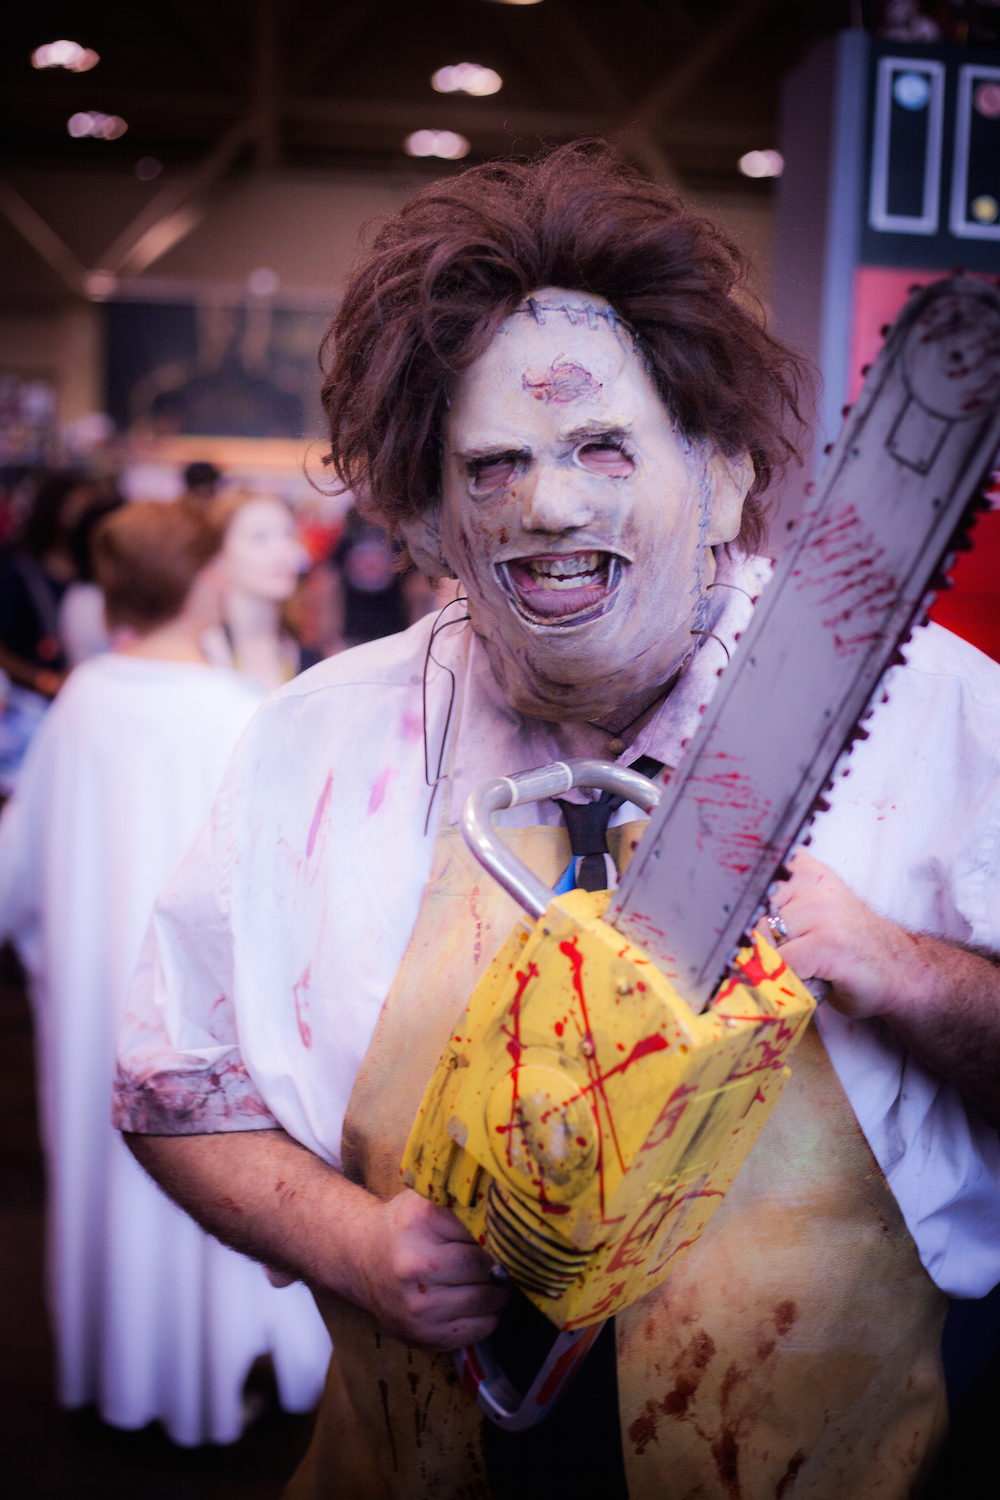 Leatherfce from Texas Chainsaw Massacre cosplay photographs